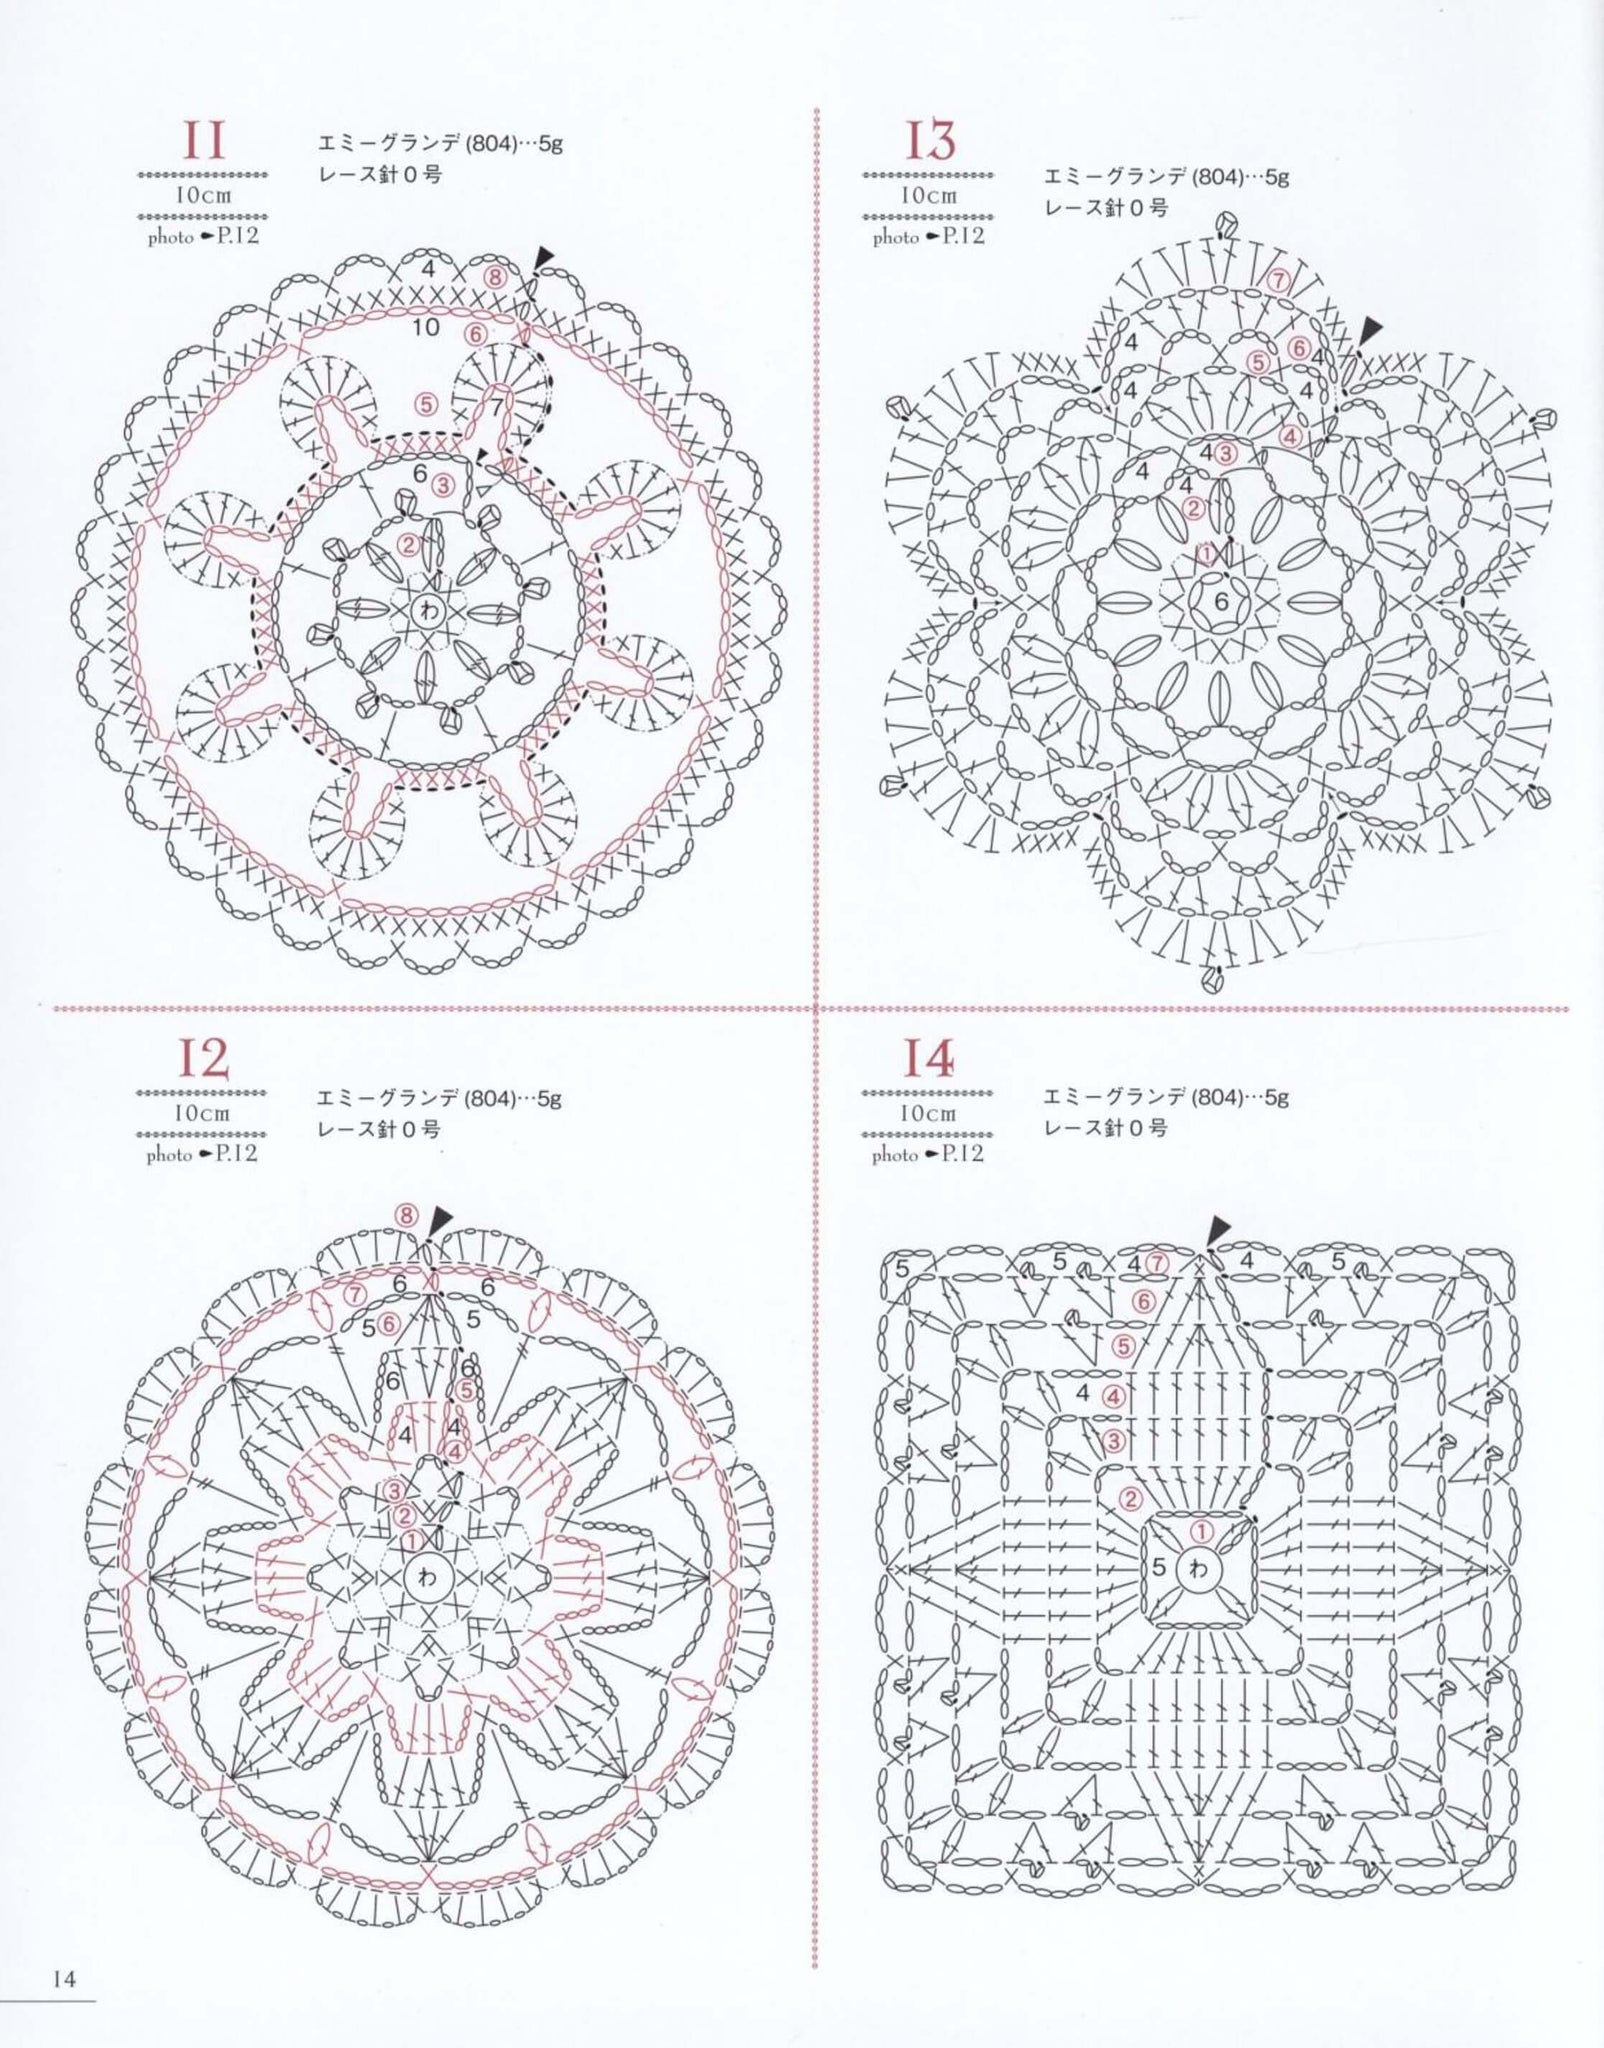 Cute and easy small crochet doily designs 